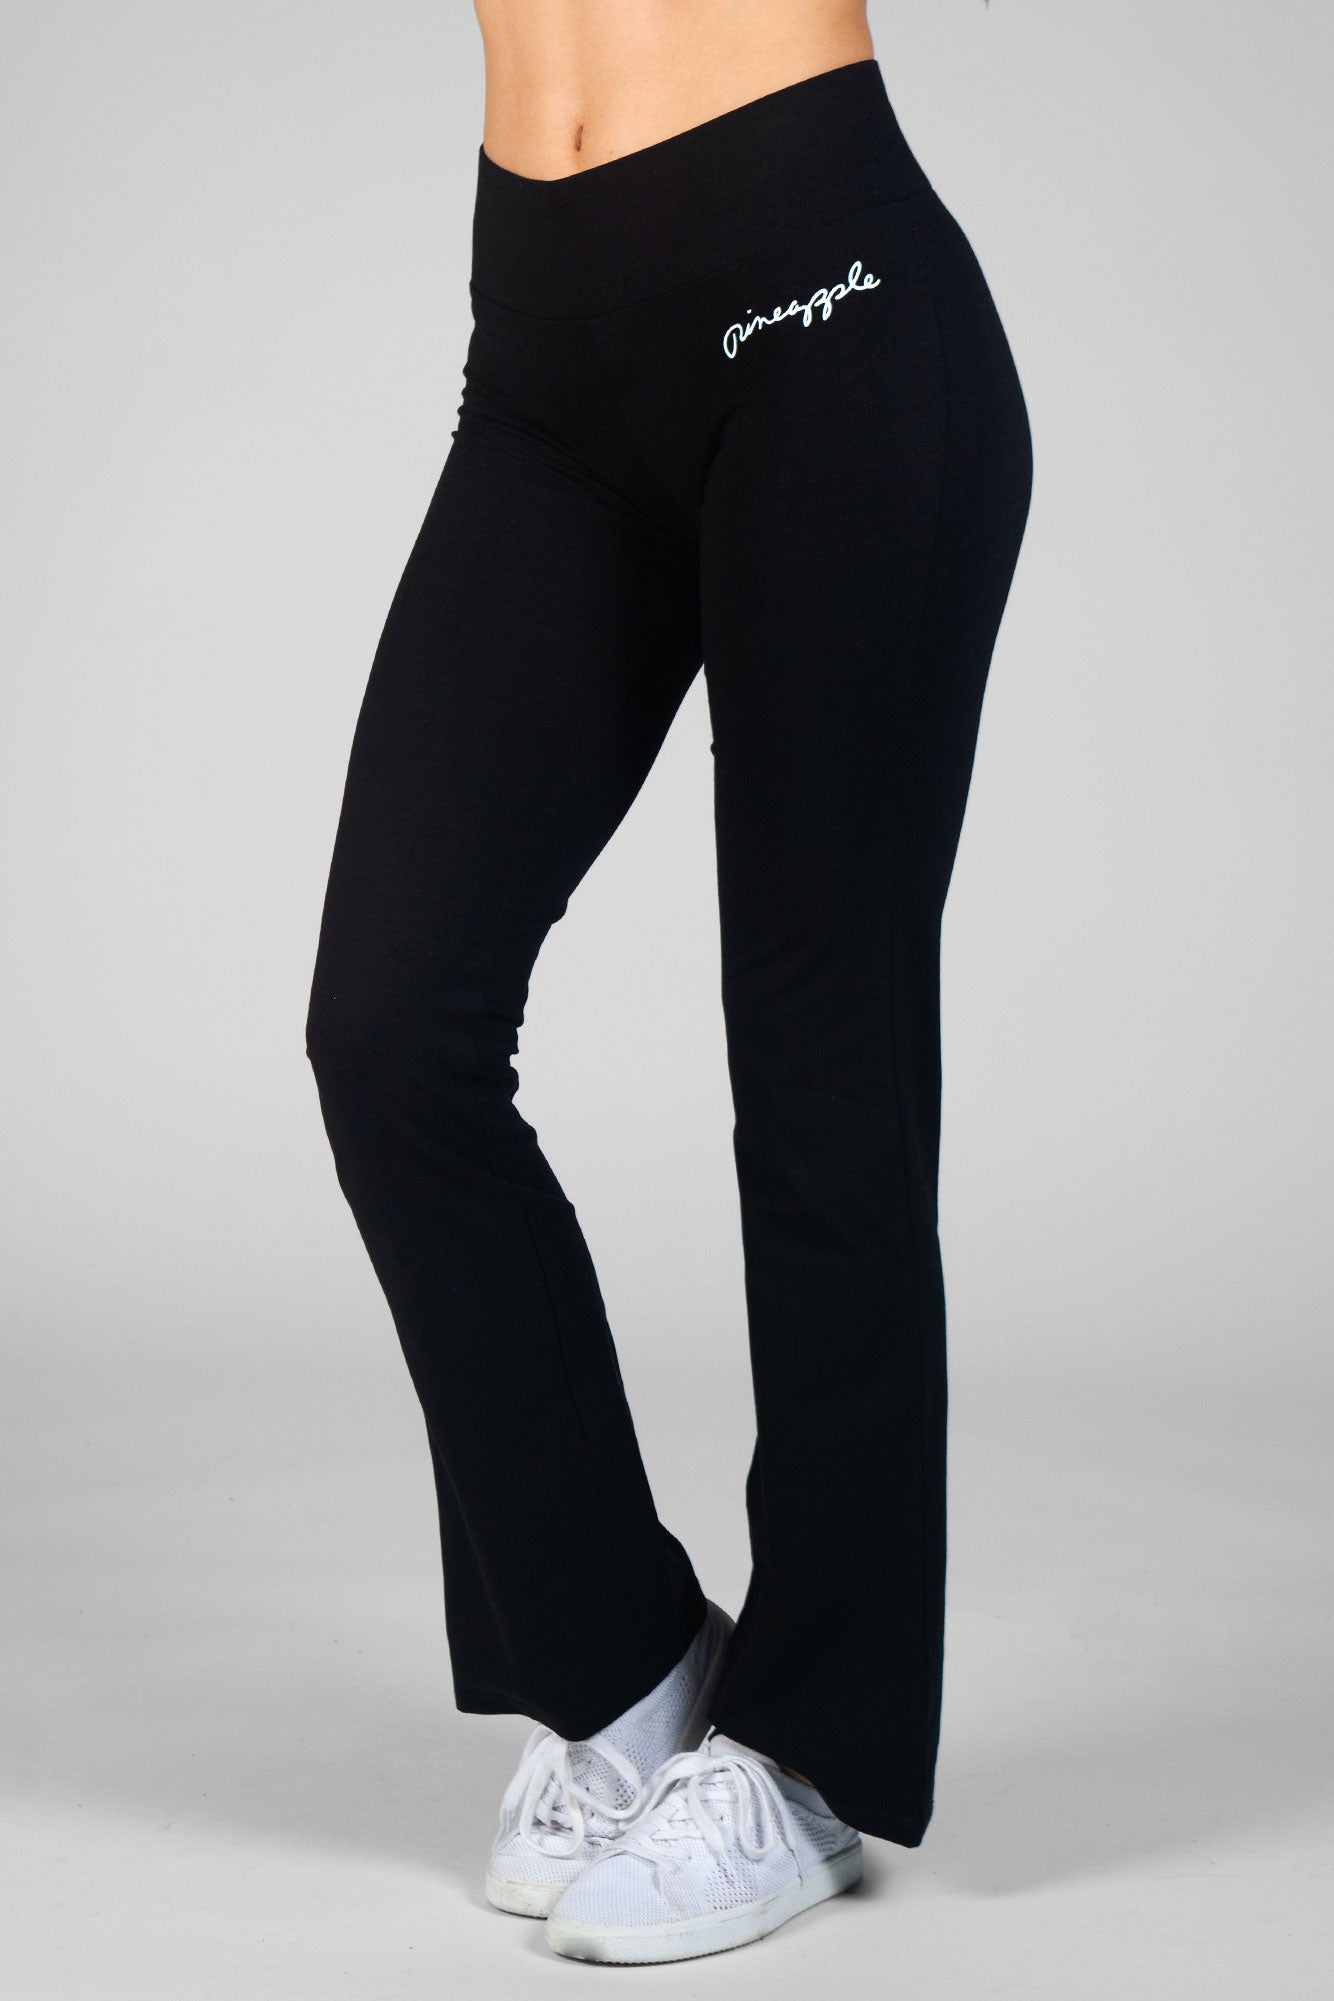 Bootcut Yoga Pants for Women with Pockets Wide Leg Women's